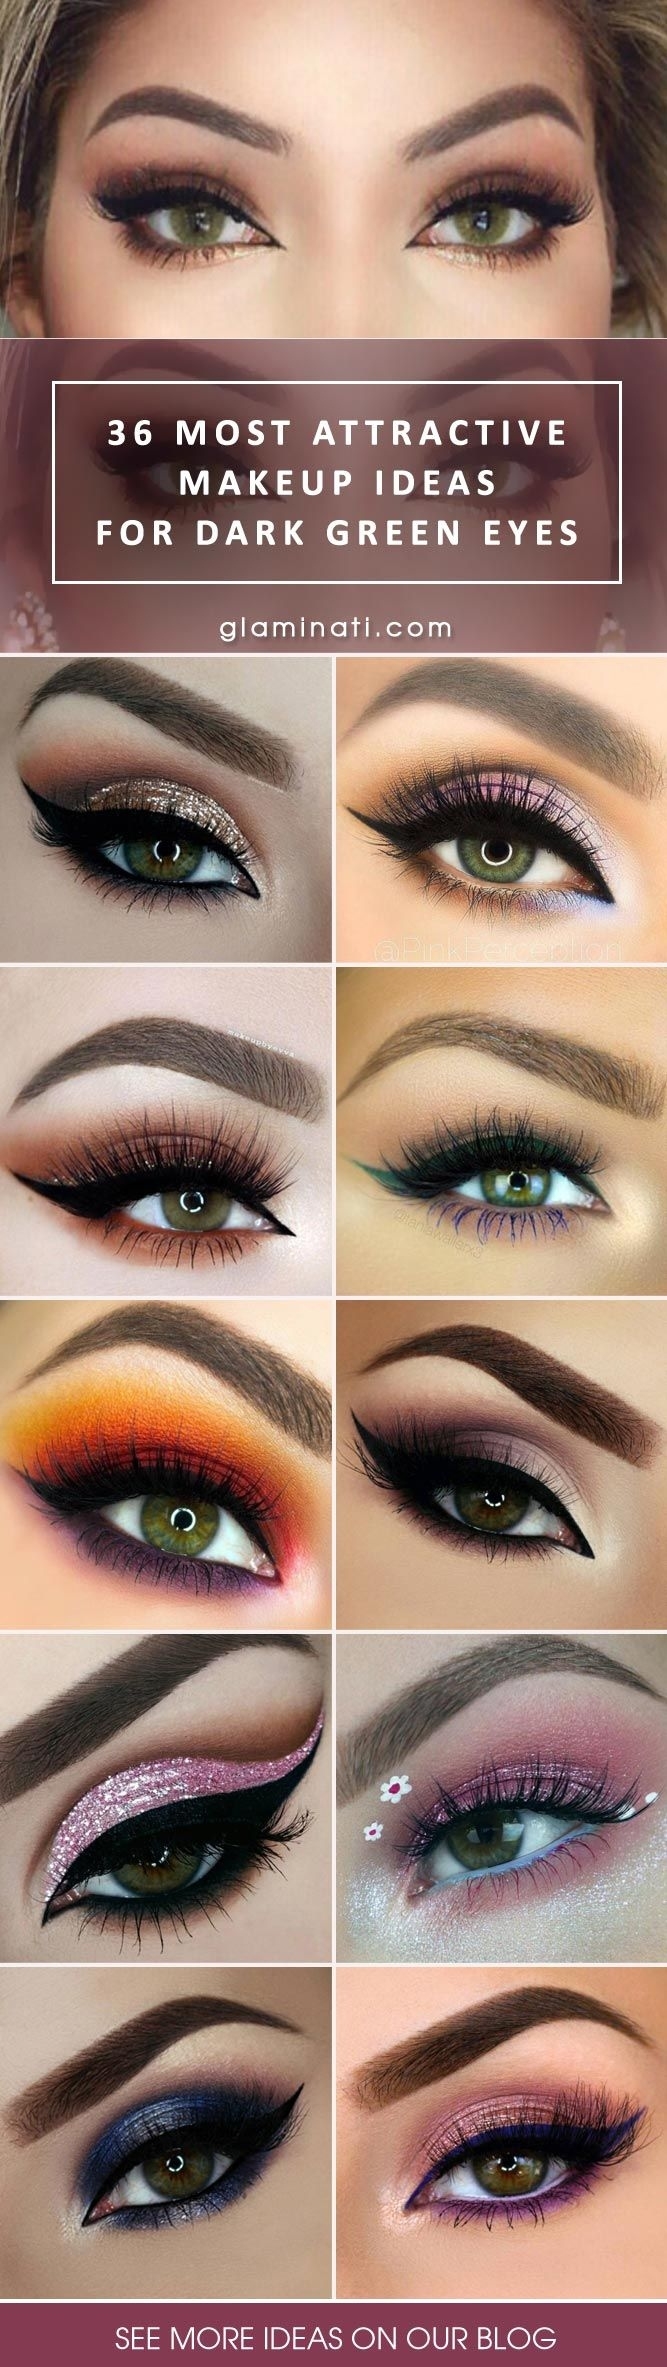 42 Most Attractive Makeup Ideas For Dark Green Eyes | #makemeup throughout Good Eyeshadow Colors For Dark Green Eyes